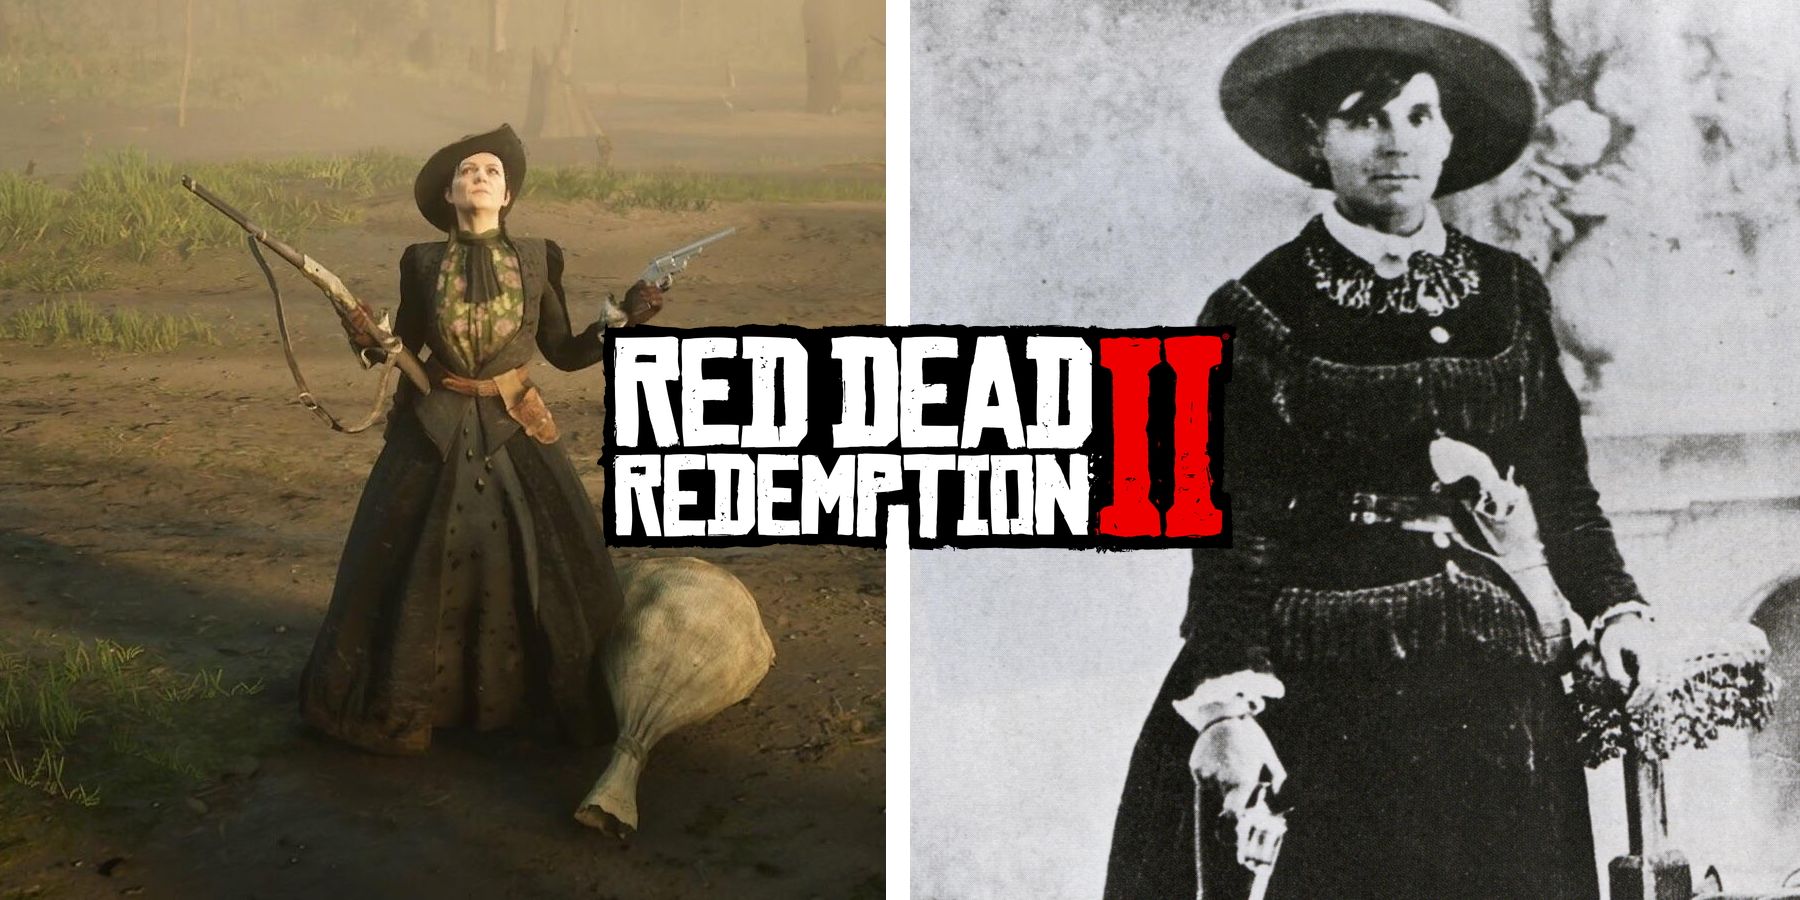 midnat controller tag et billede The Red Dead Redemption 2 Characters Based on Real People